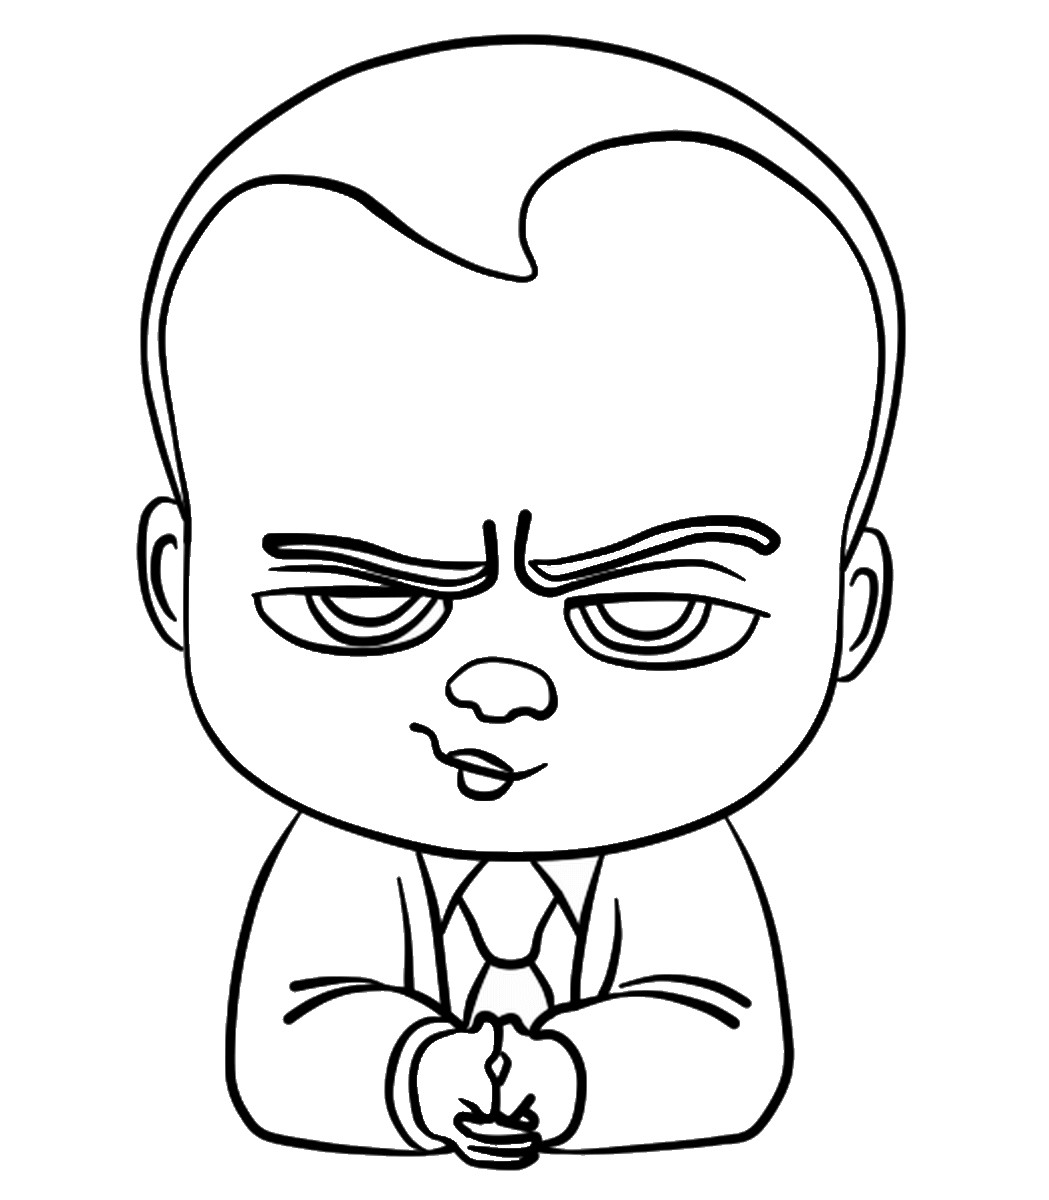 Boss Baby Coloring Pages
 Top 10 The Boss Baby Coloring Pages